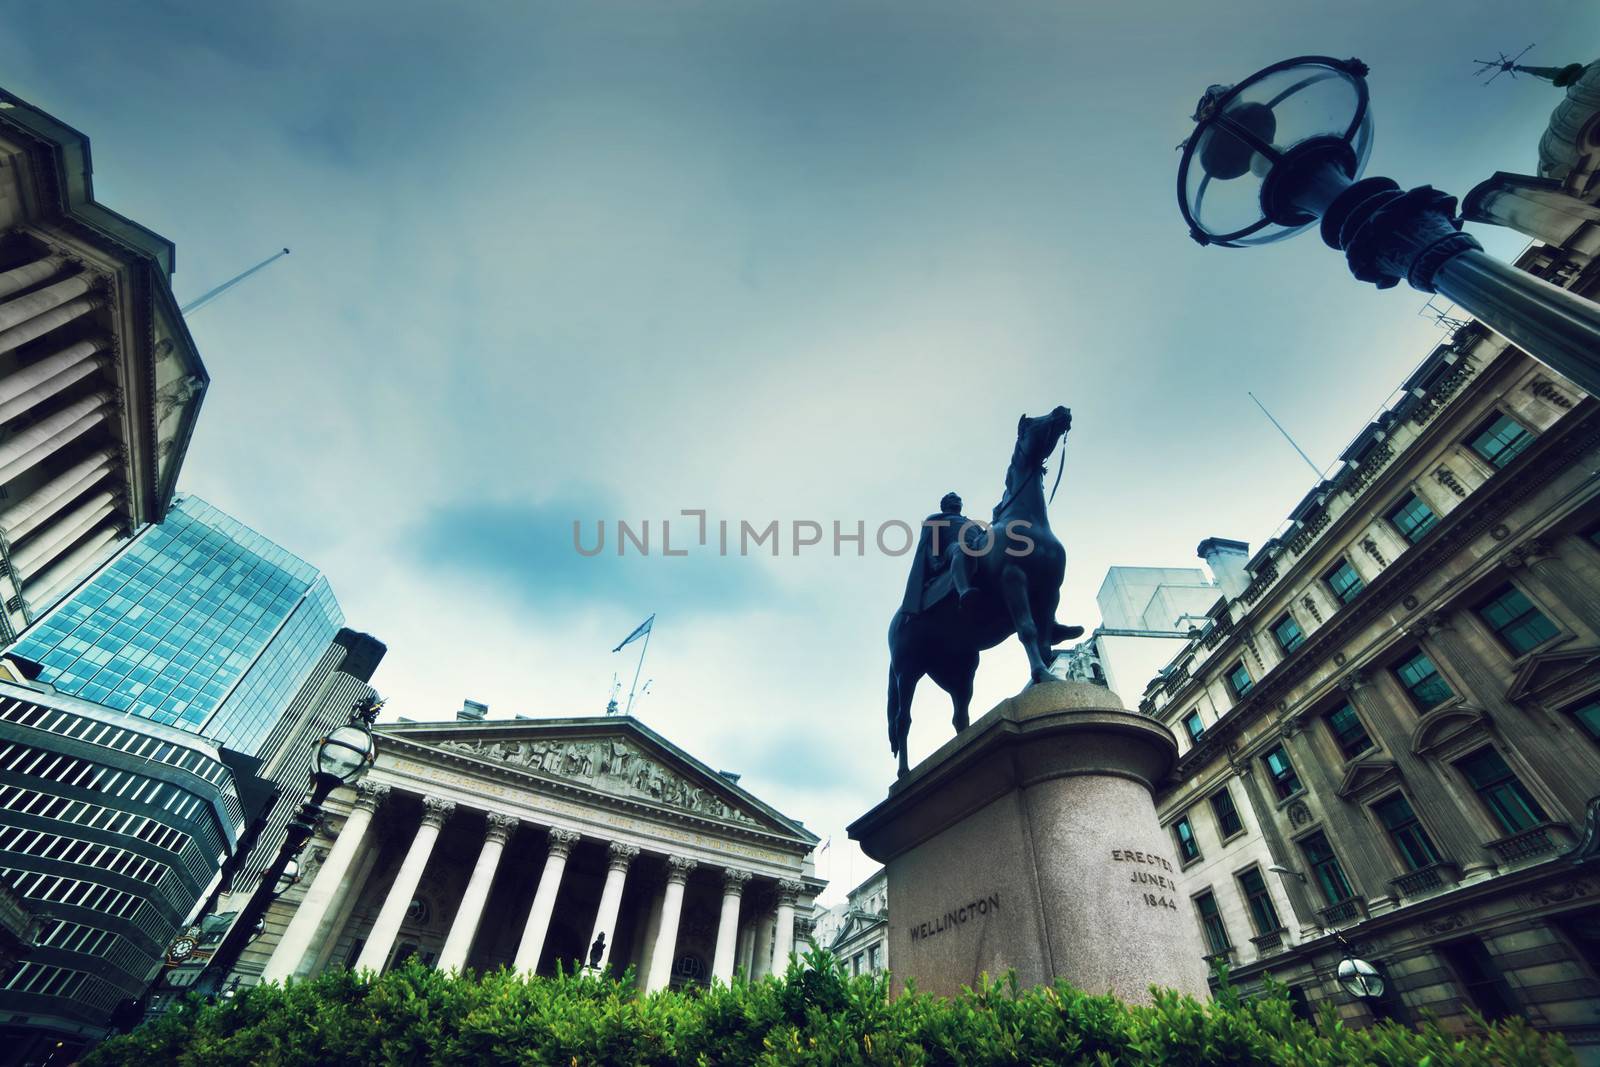 Bank of England, the Royal Exchange and the Wellington statue in London, the UK